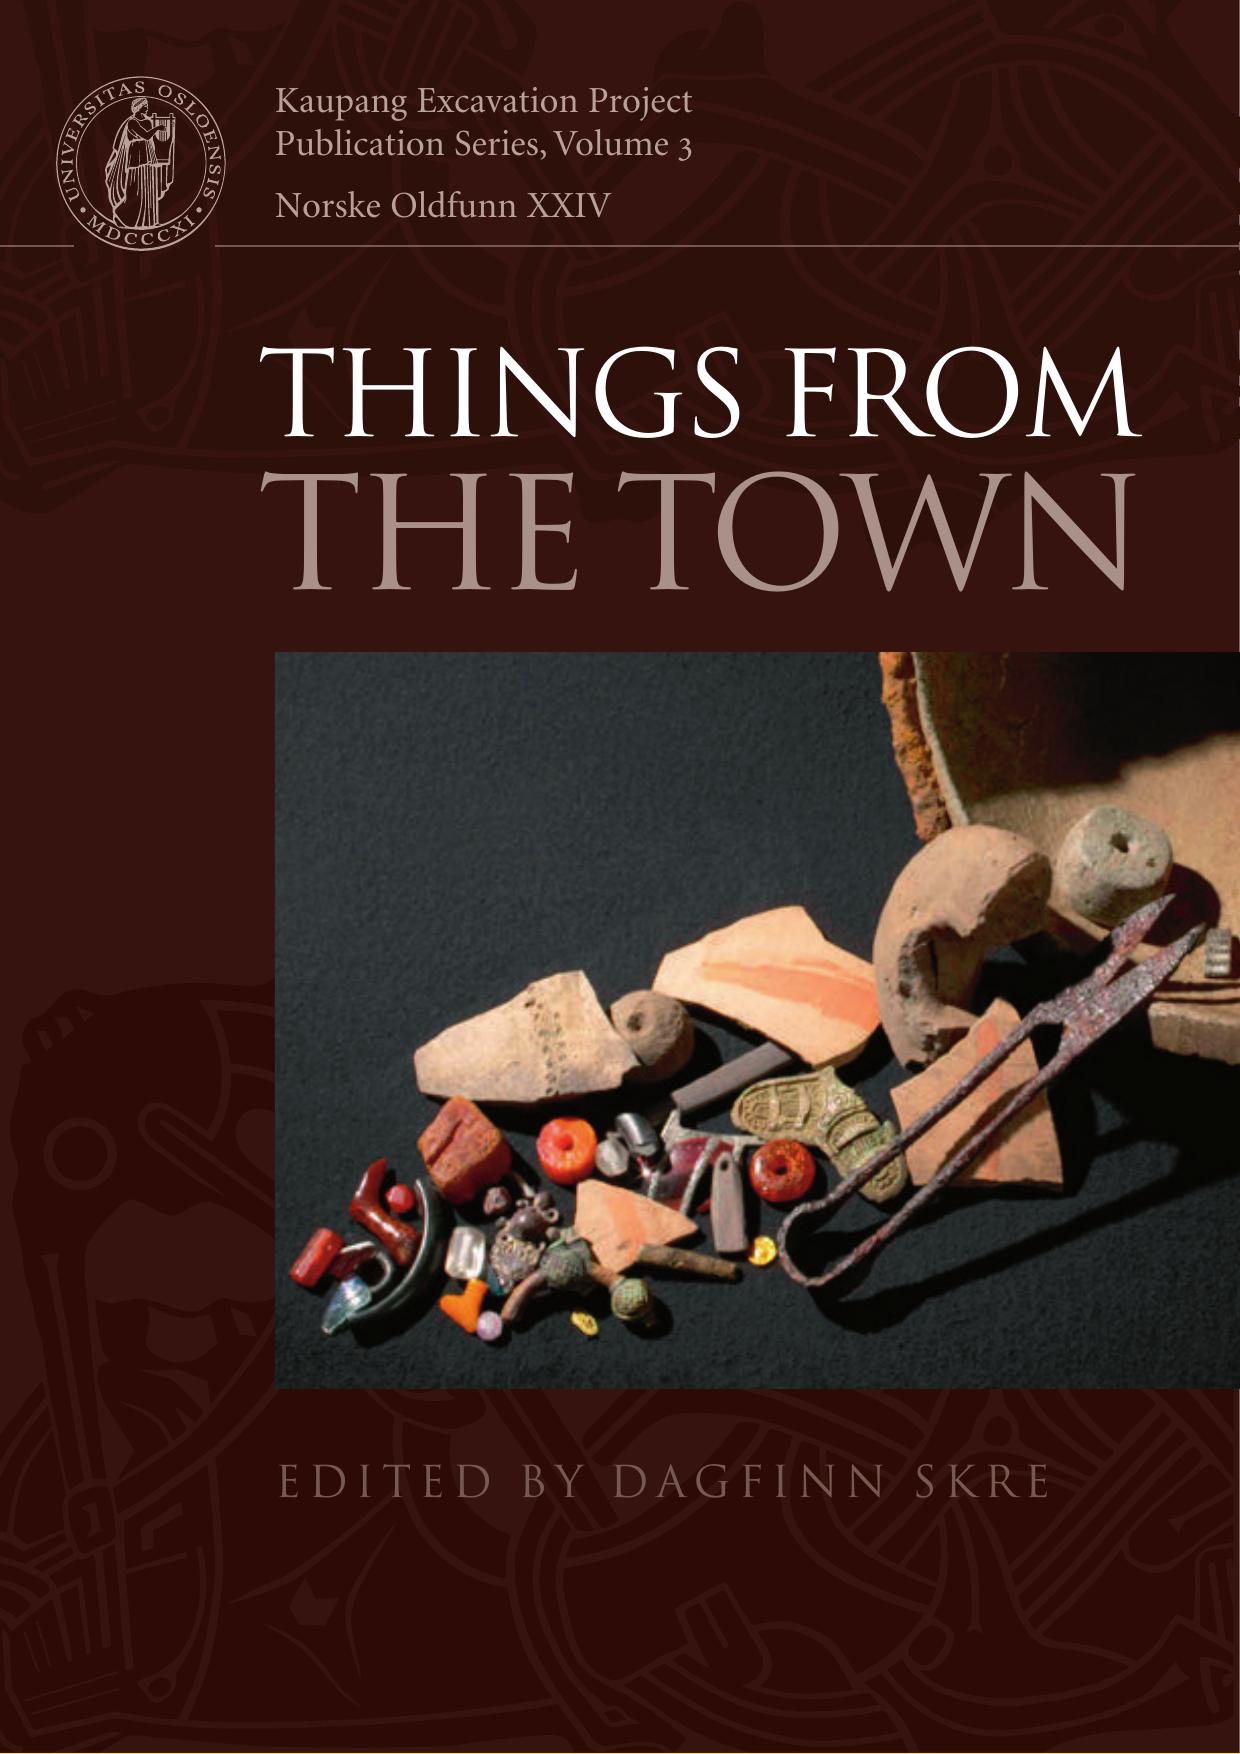 Things from the Town: Artefacts and Inhabitants in Viking-Age Kaupang by Dagfinn Skre (ed.)